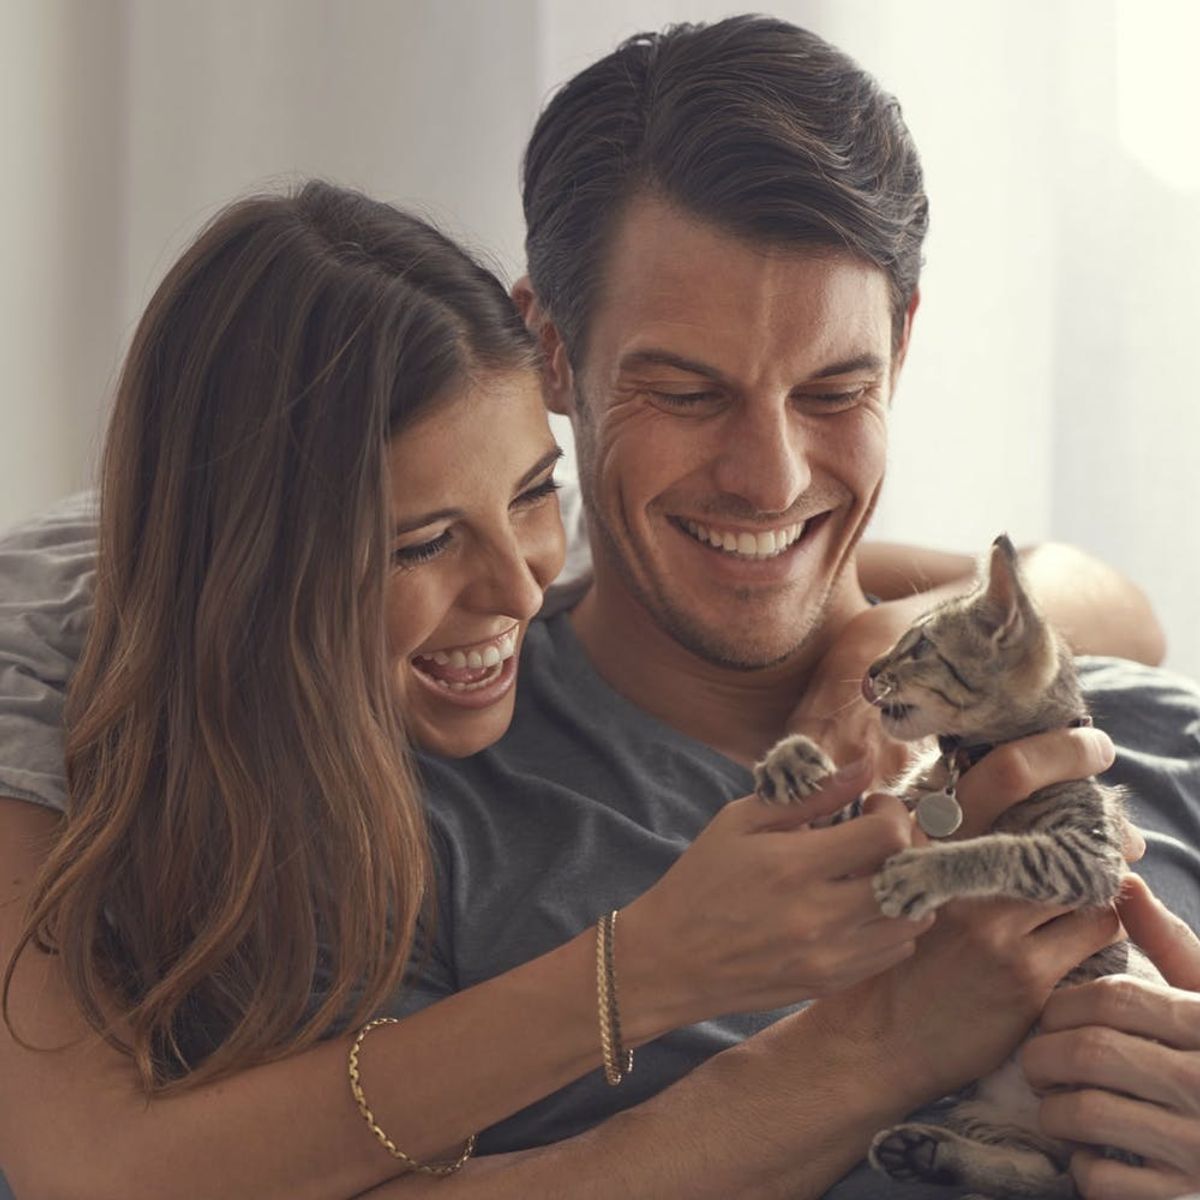 Thinking About Adopting a Kitten? Read These 5 Tips from the SPCA First